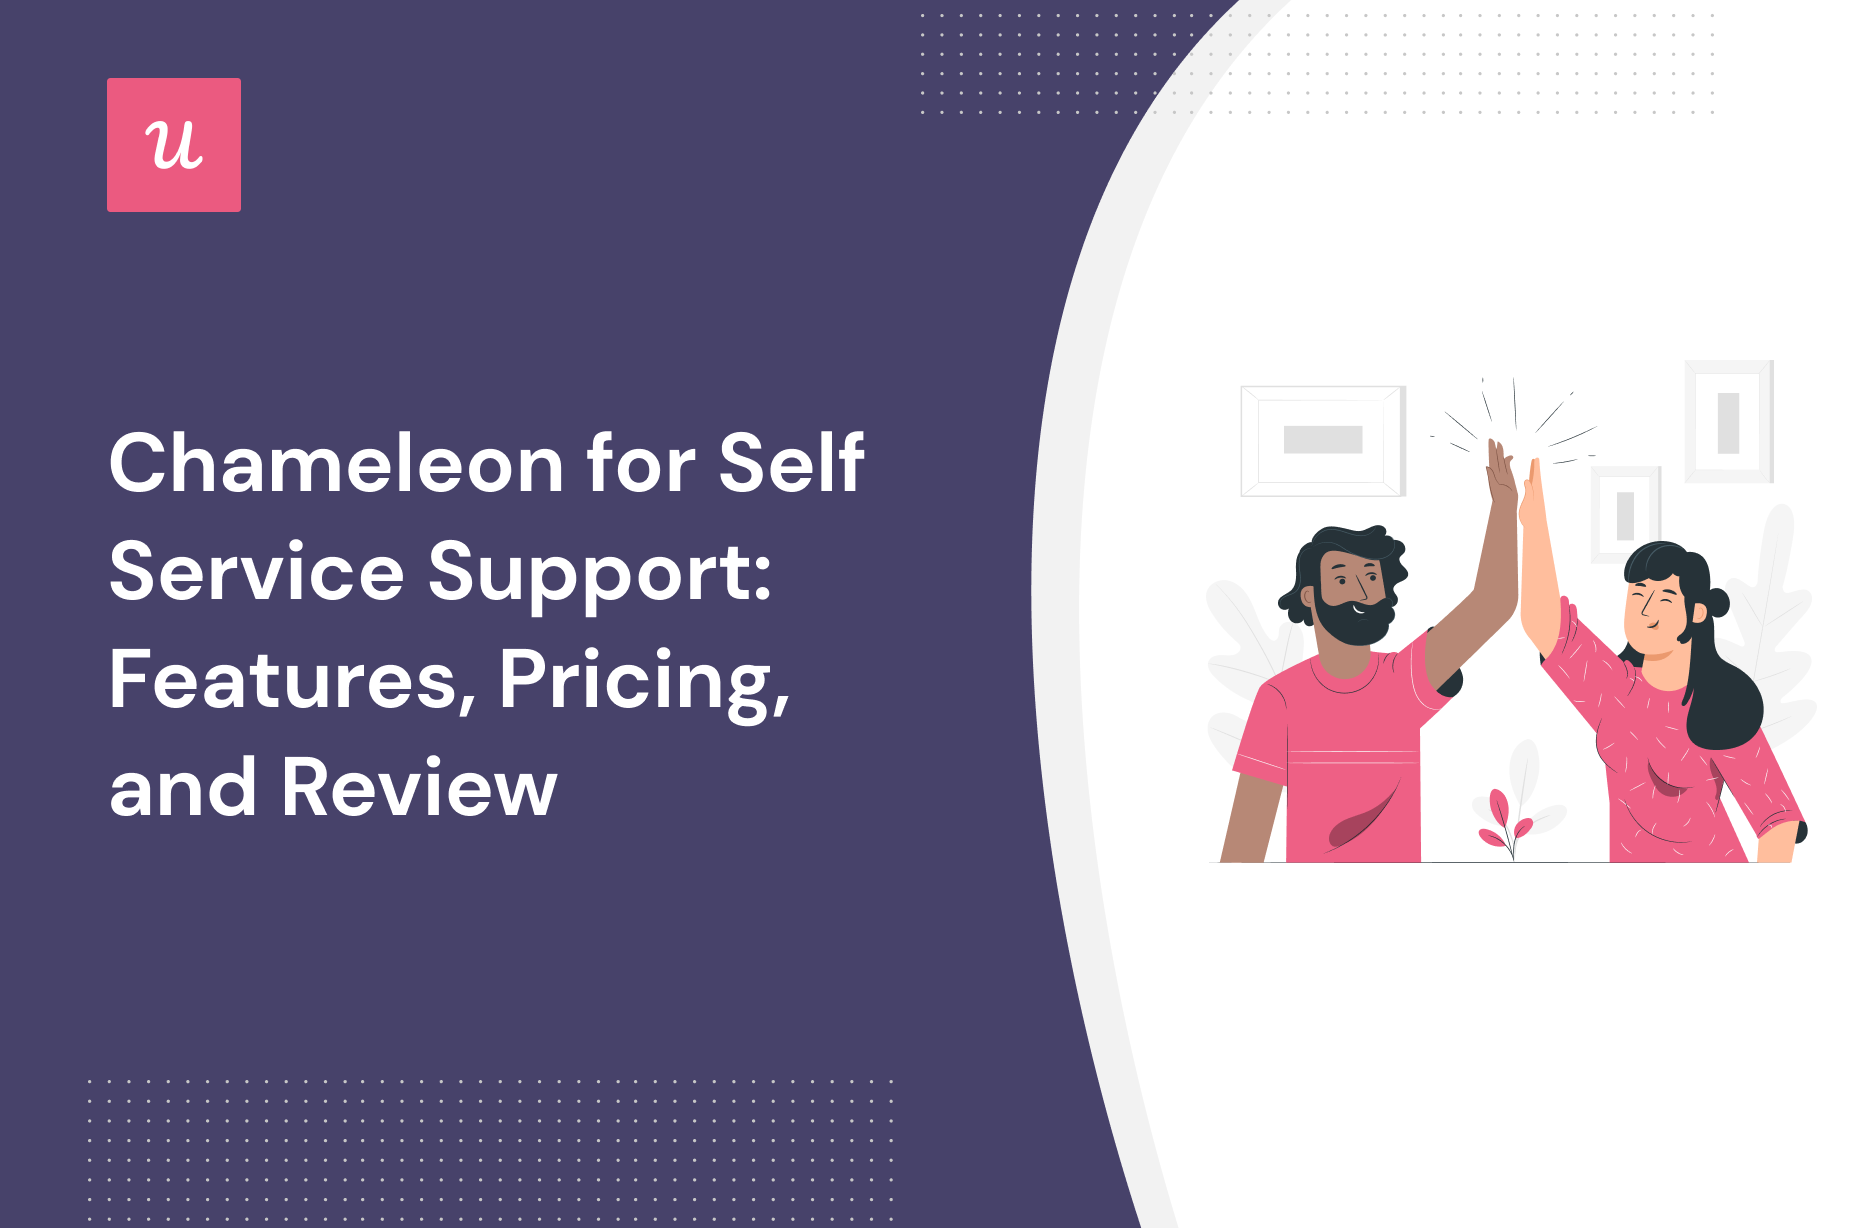 Chameleon for Self Service Support: Features, Pricing, and Review